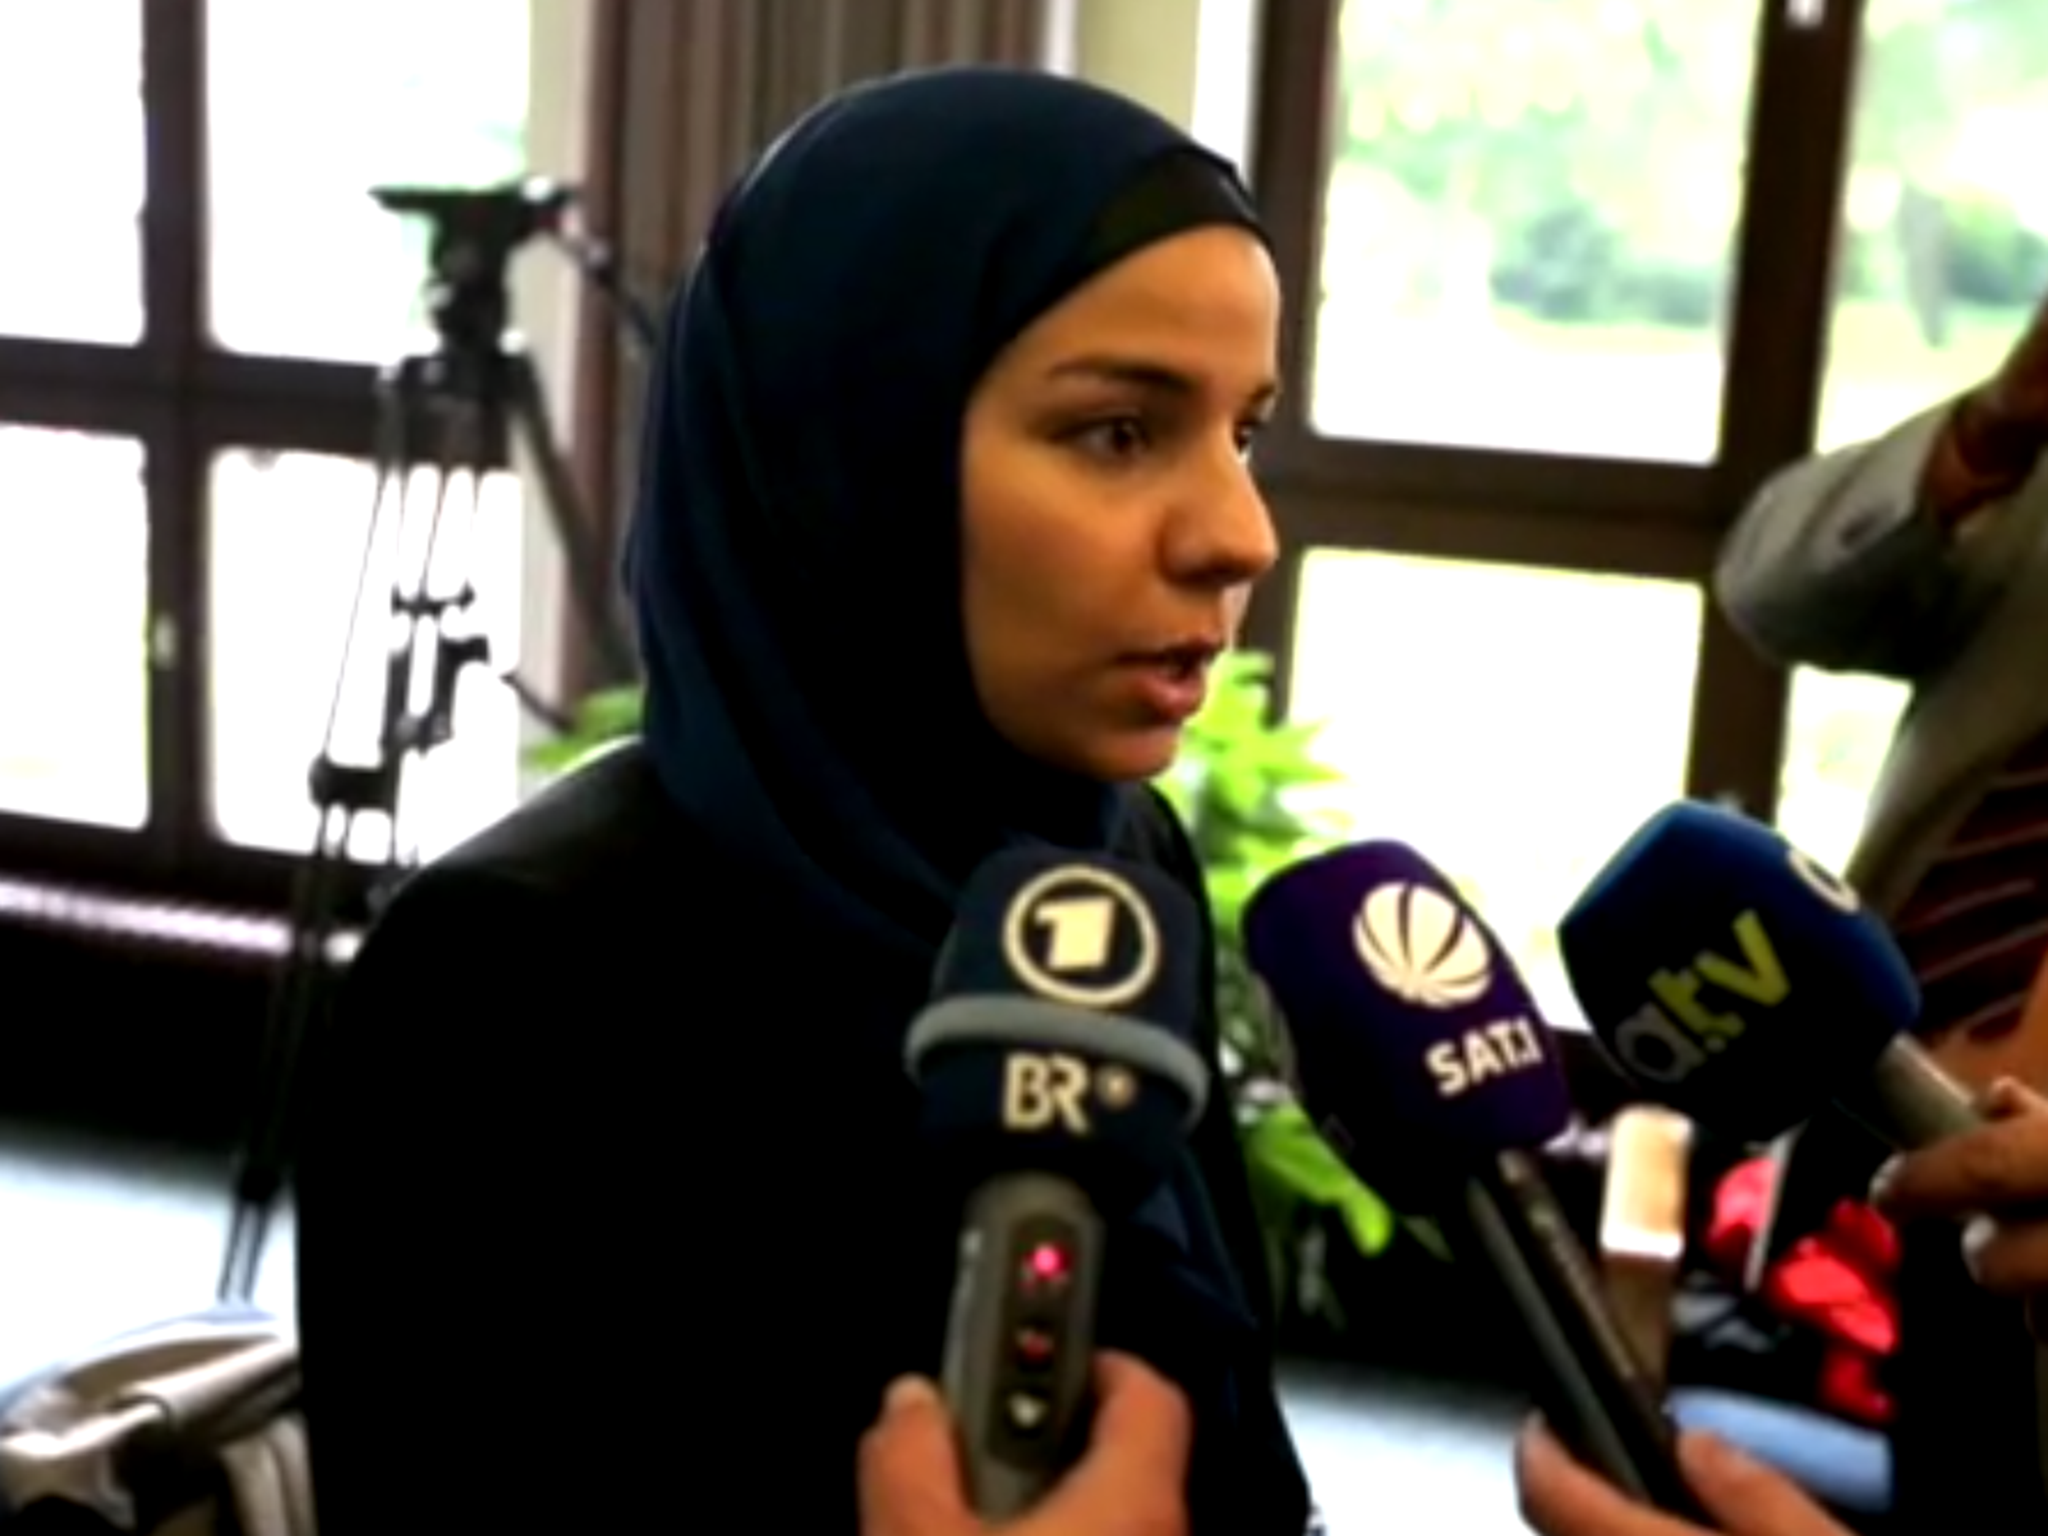 Muslim law trainee wins case against the state of Bavaria after being banned from wearing a headscarf at work The Independent The Independent